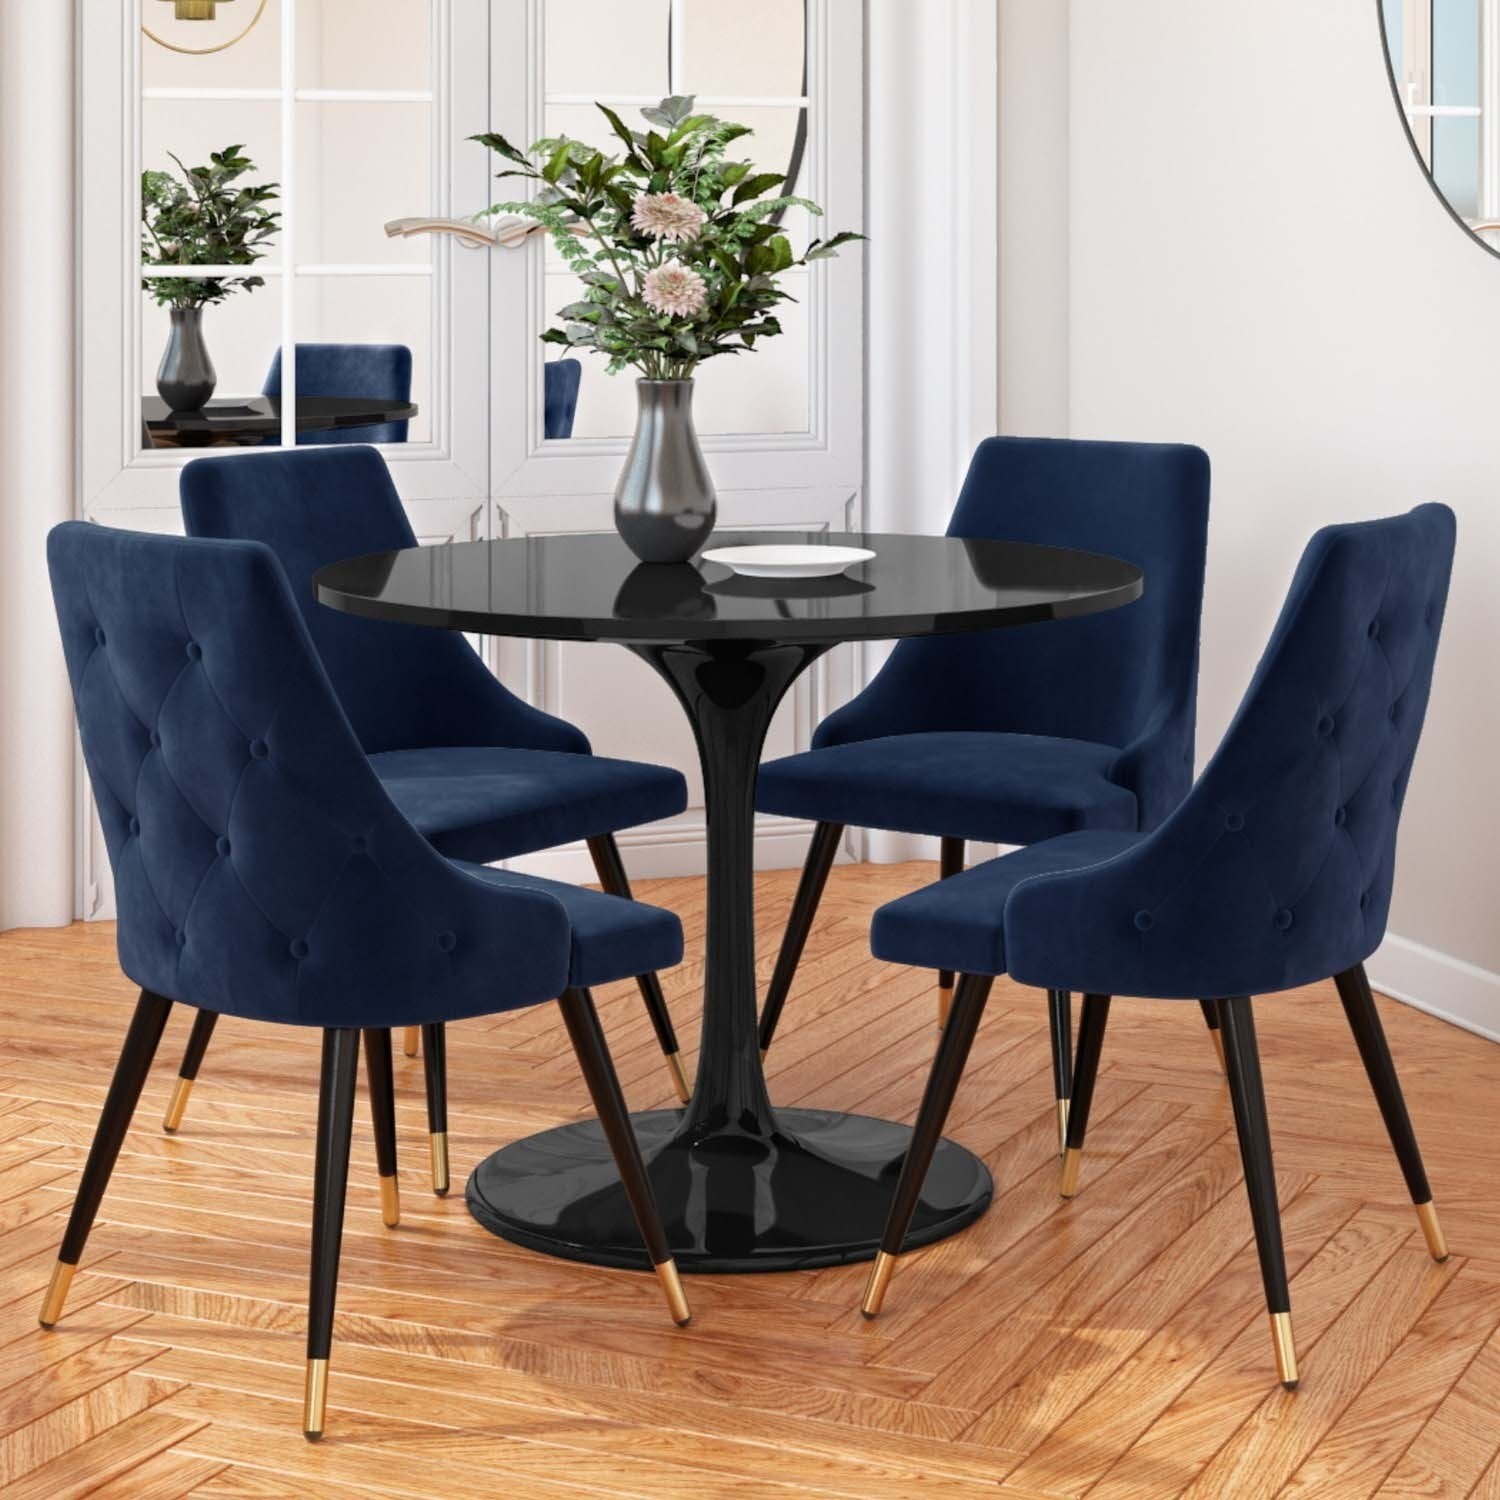 Aura Black Round High Gloss Dining Table With 4 Maddy Navy Dining Chairs Furniture123